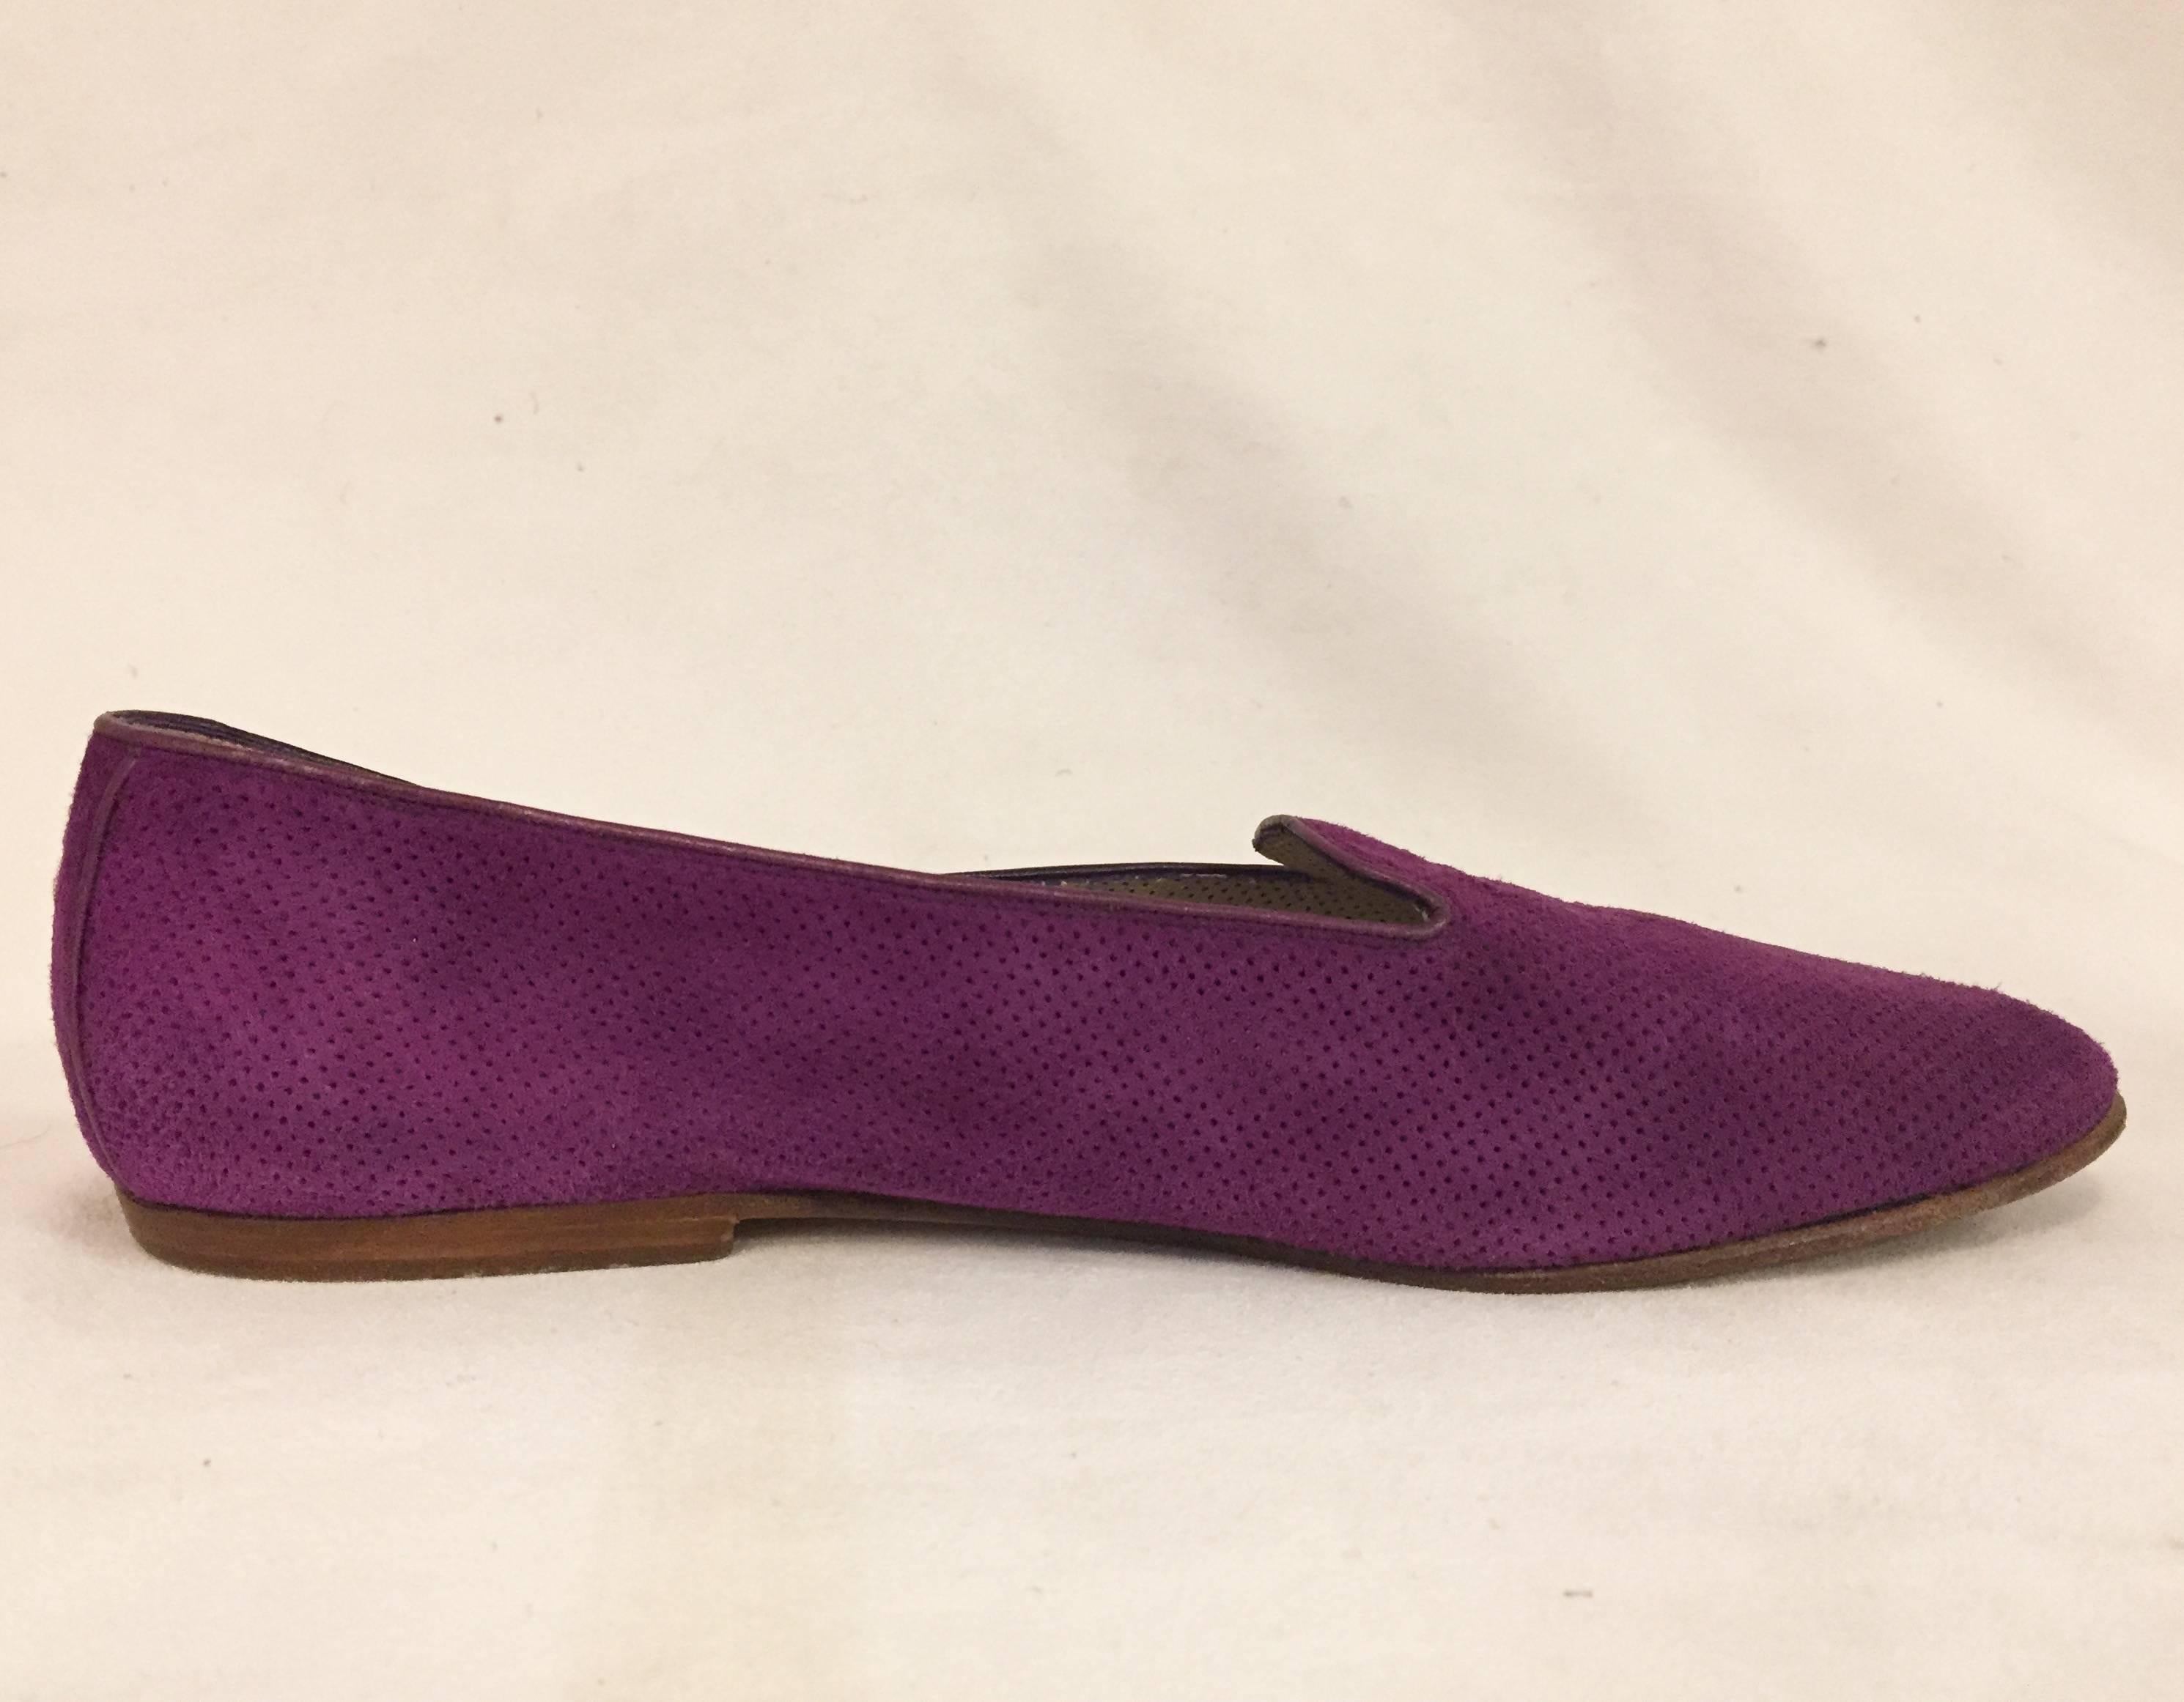 Compelling Chanel Violet Suede Loafers With Small CC on Top In Excellent Condition For Sale In Palm Beach, FL